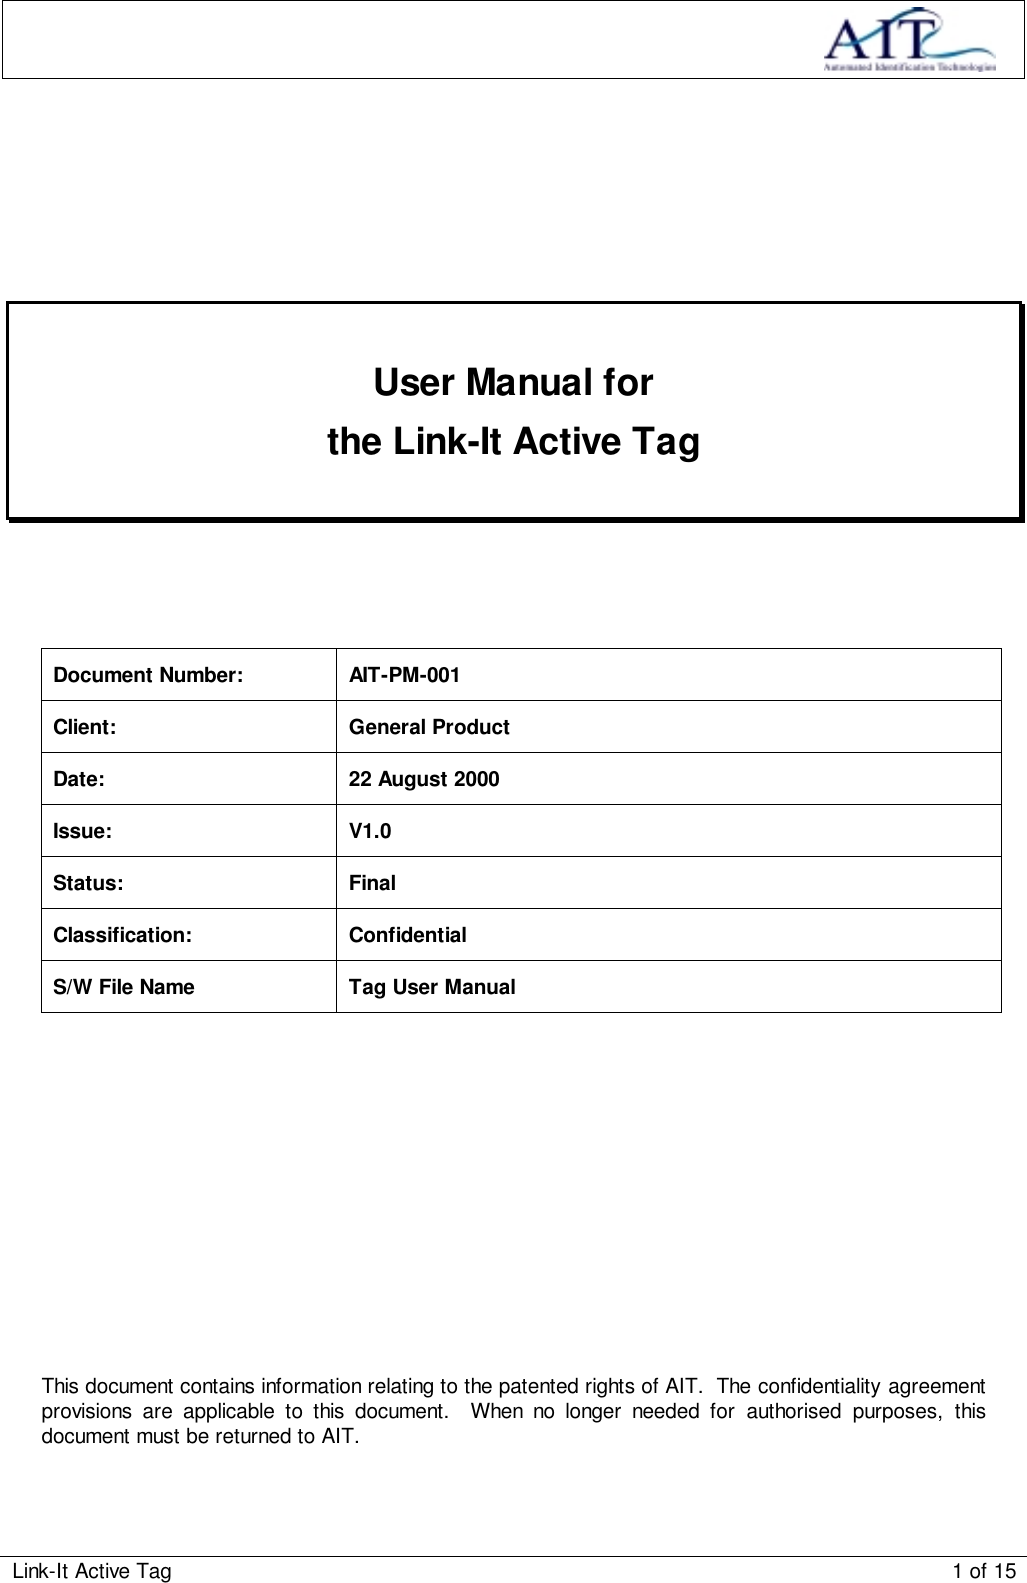 Link-It Active Tag 1 of 15User Manual forthe Link-It Active TagDocument Number: AIT-PM-001Client: General ProductDate: 22 August 2000Issue: V1.0Status: FinalClassification: ConfidentialS/W File Name Tag User ManualThis document contains information relating to the patented rights of AIT.  The confidentiality agreementprovisions are applicable to this document.  When no longer needed for authorised purposes, thisdocument must be returned to AIT.